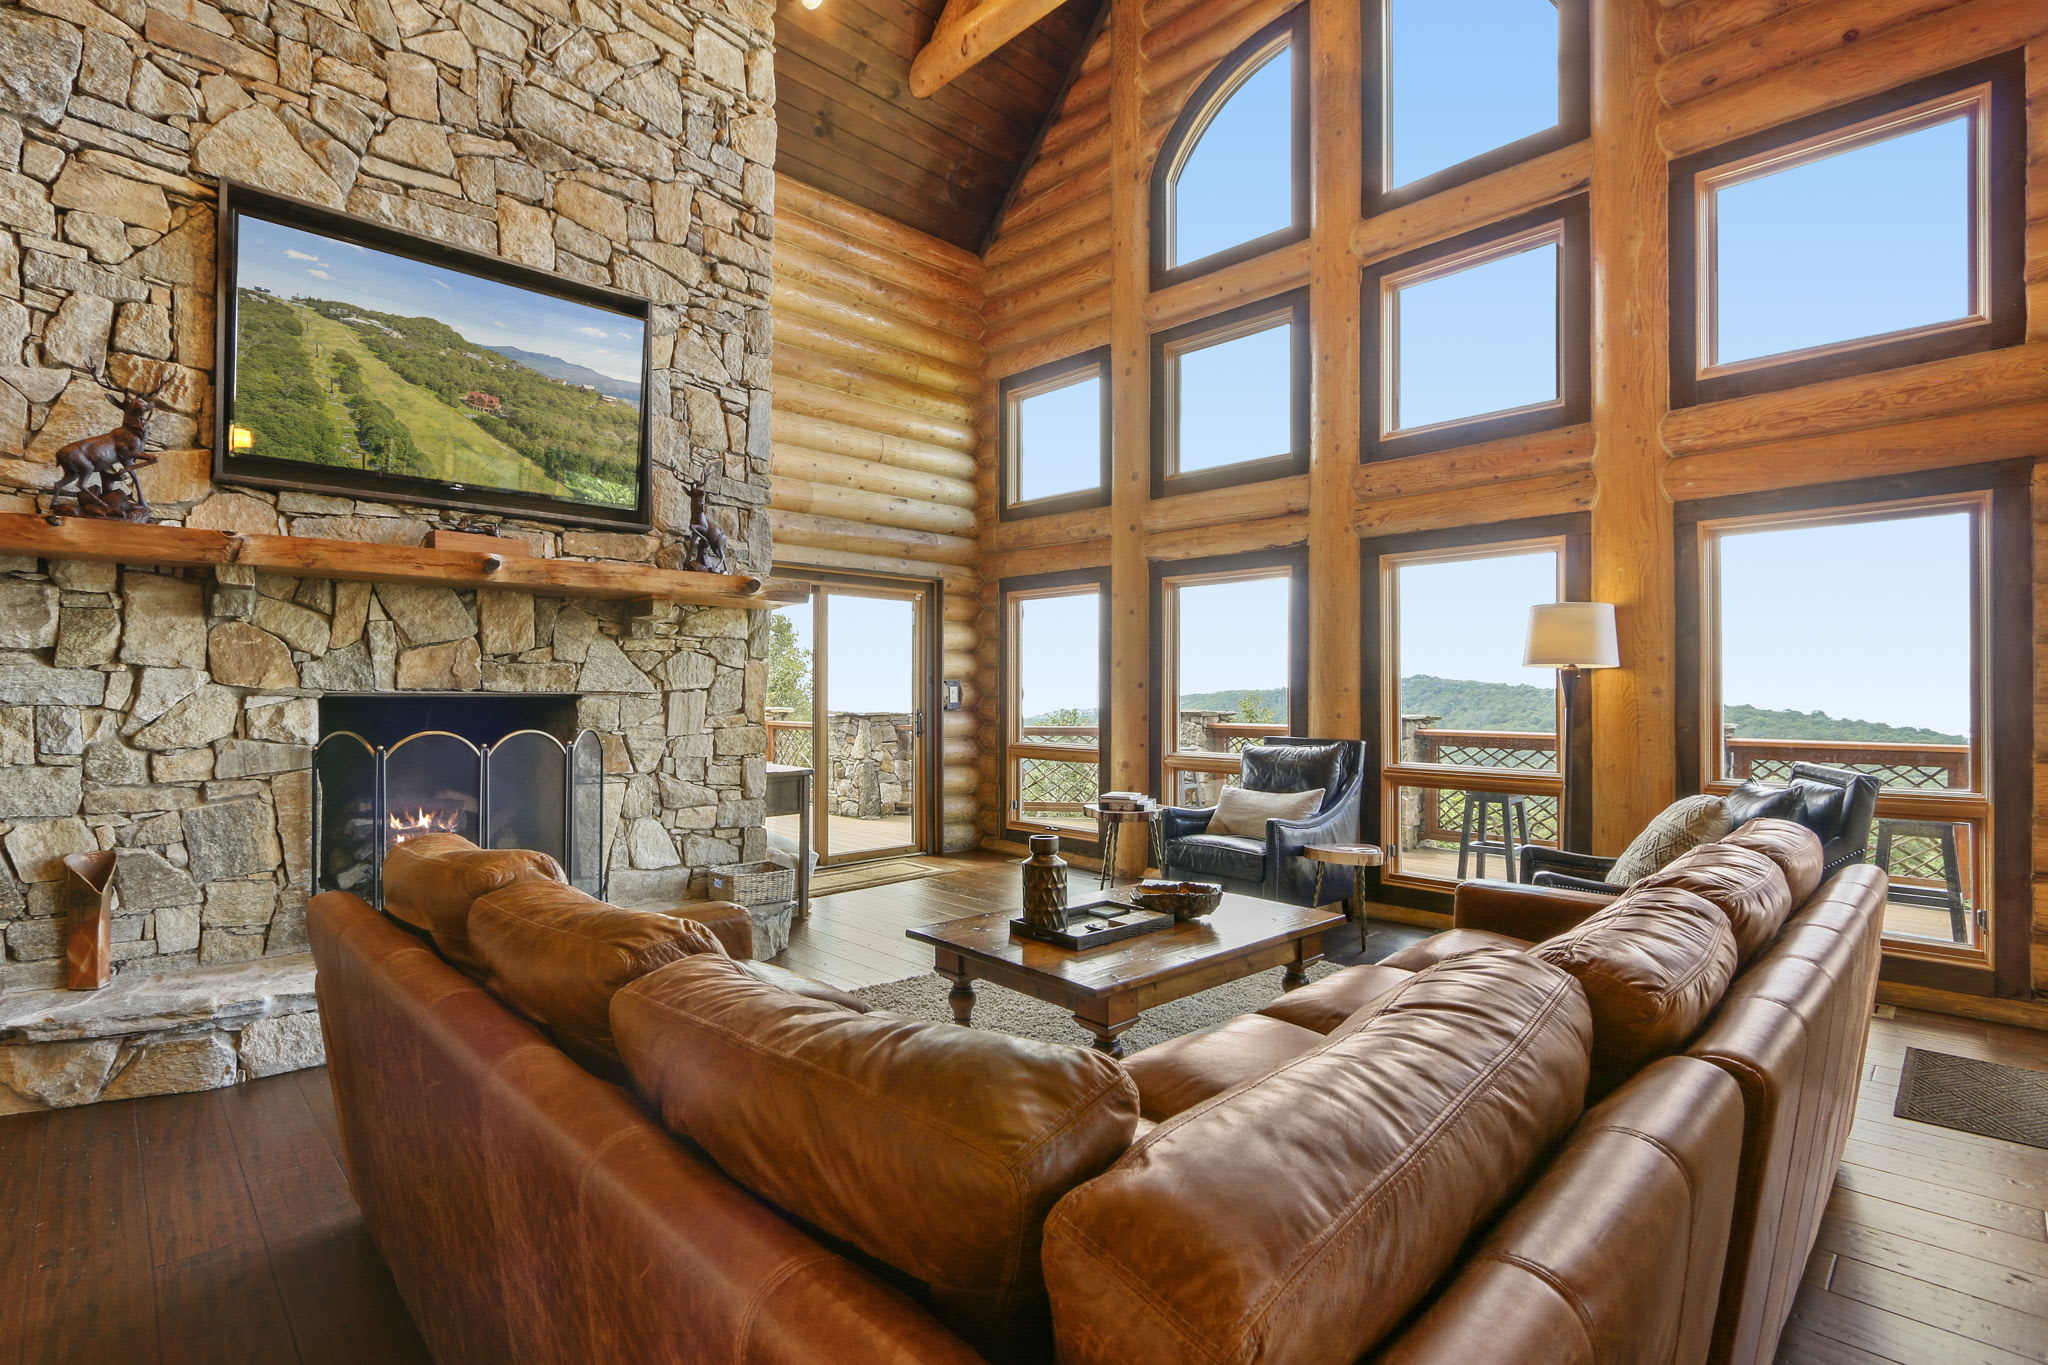 Cozy up on the plush couch or chairs by the fireplace for a perfect evening retreat in the rustic living room.